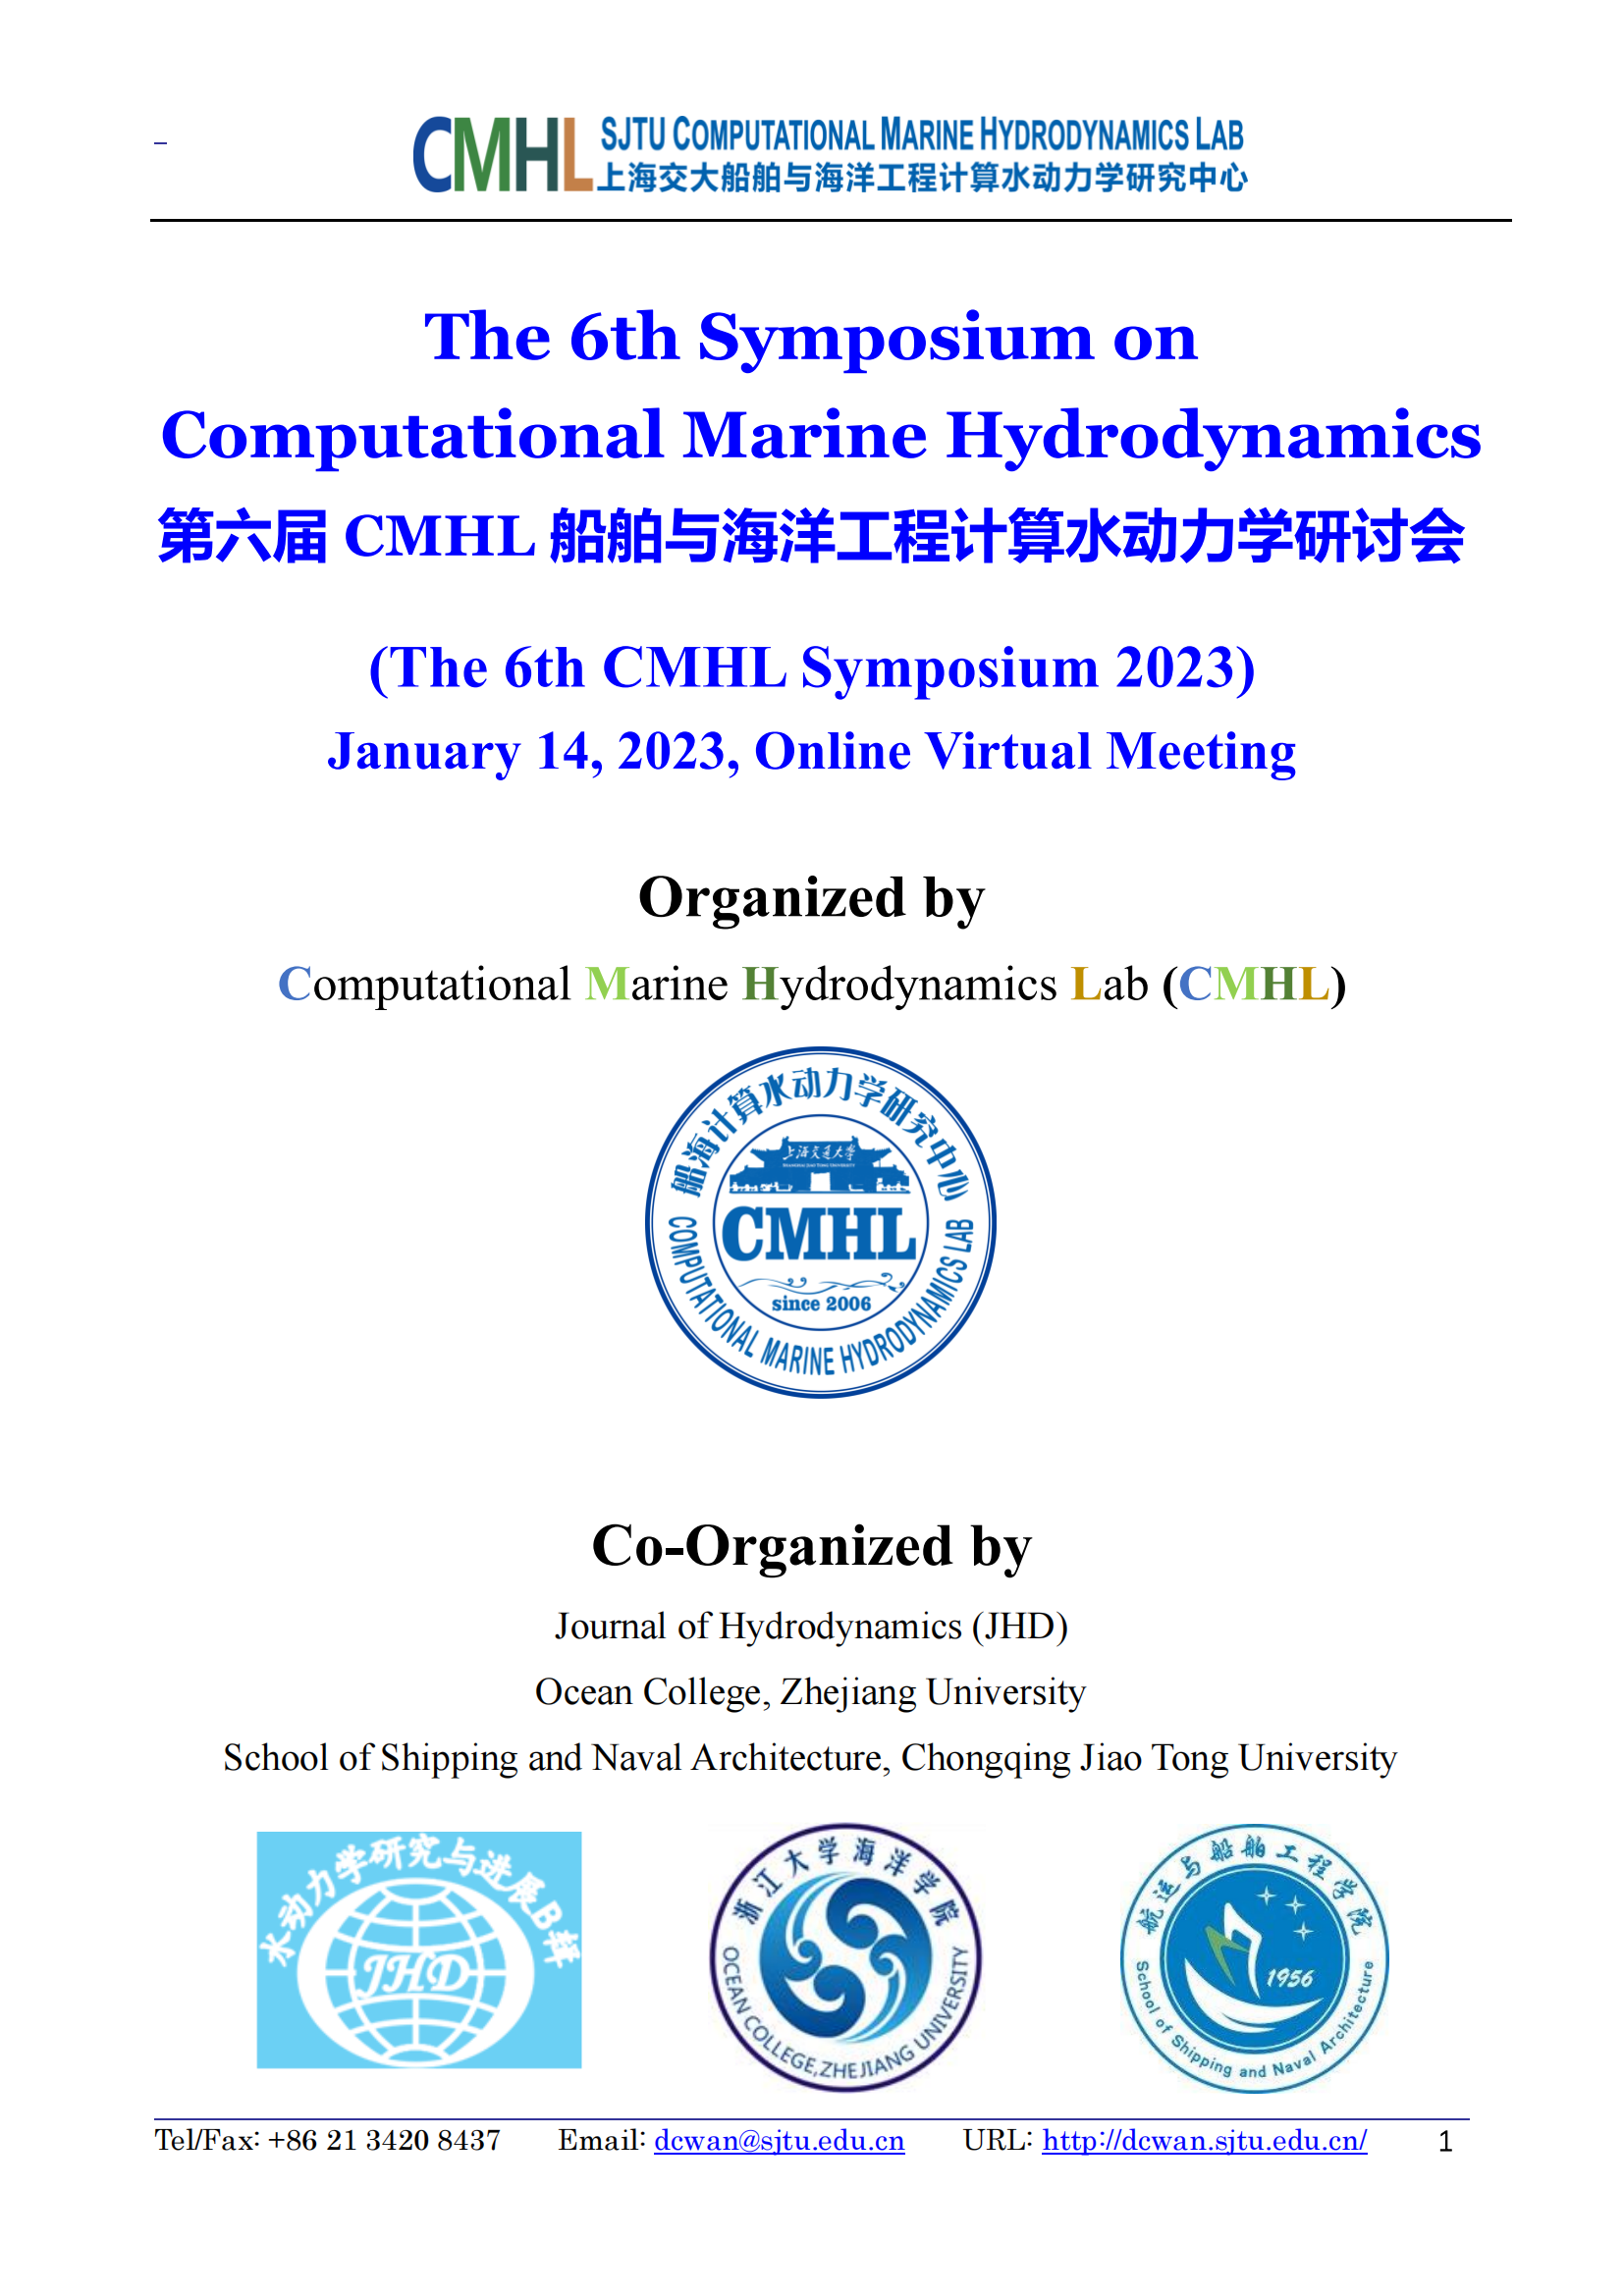 Programme for The 6th CMHL Symposium-2023-01-14(1)_01.png